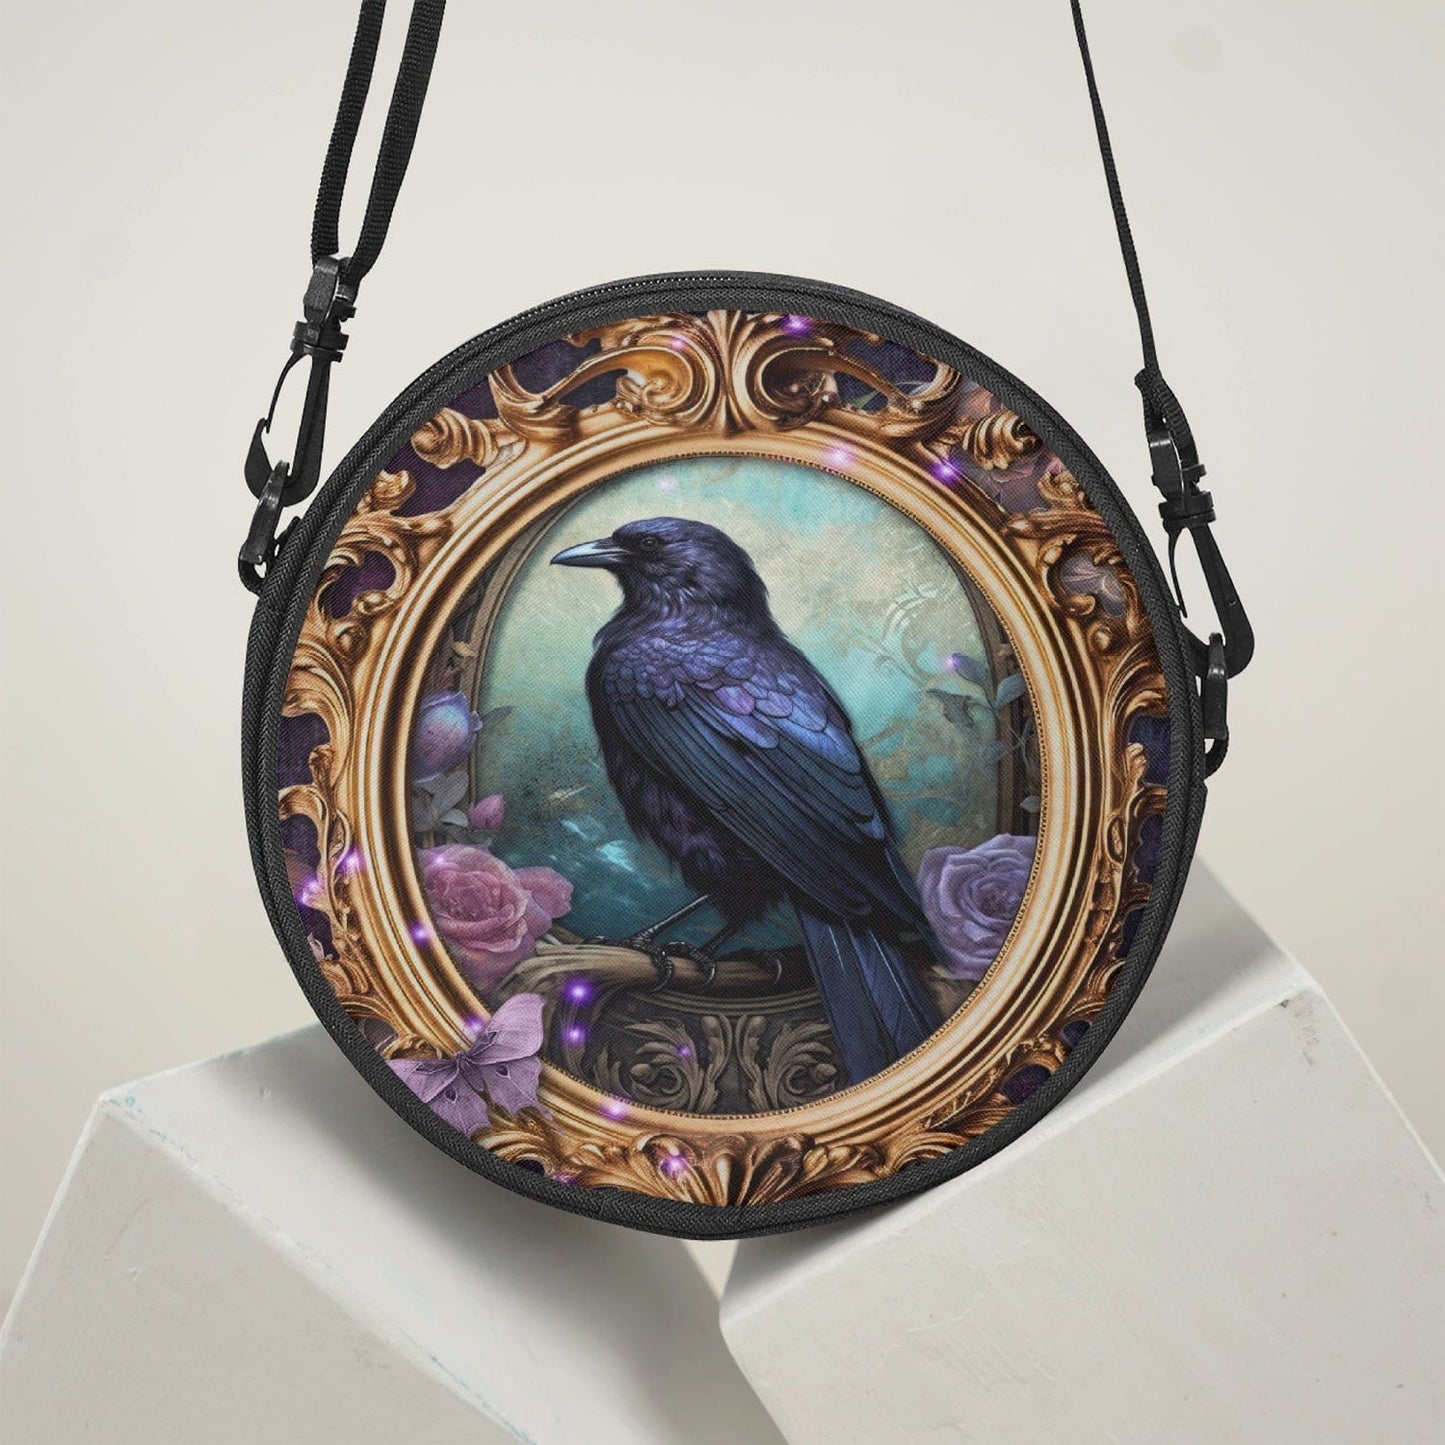 glossy black raven perched inside a gold rococo gilt frame features as the art work on this 23cm diameter round canvas cross body bag